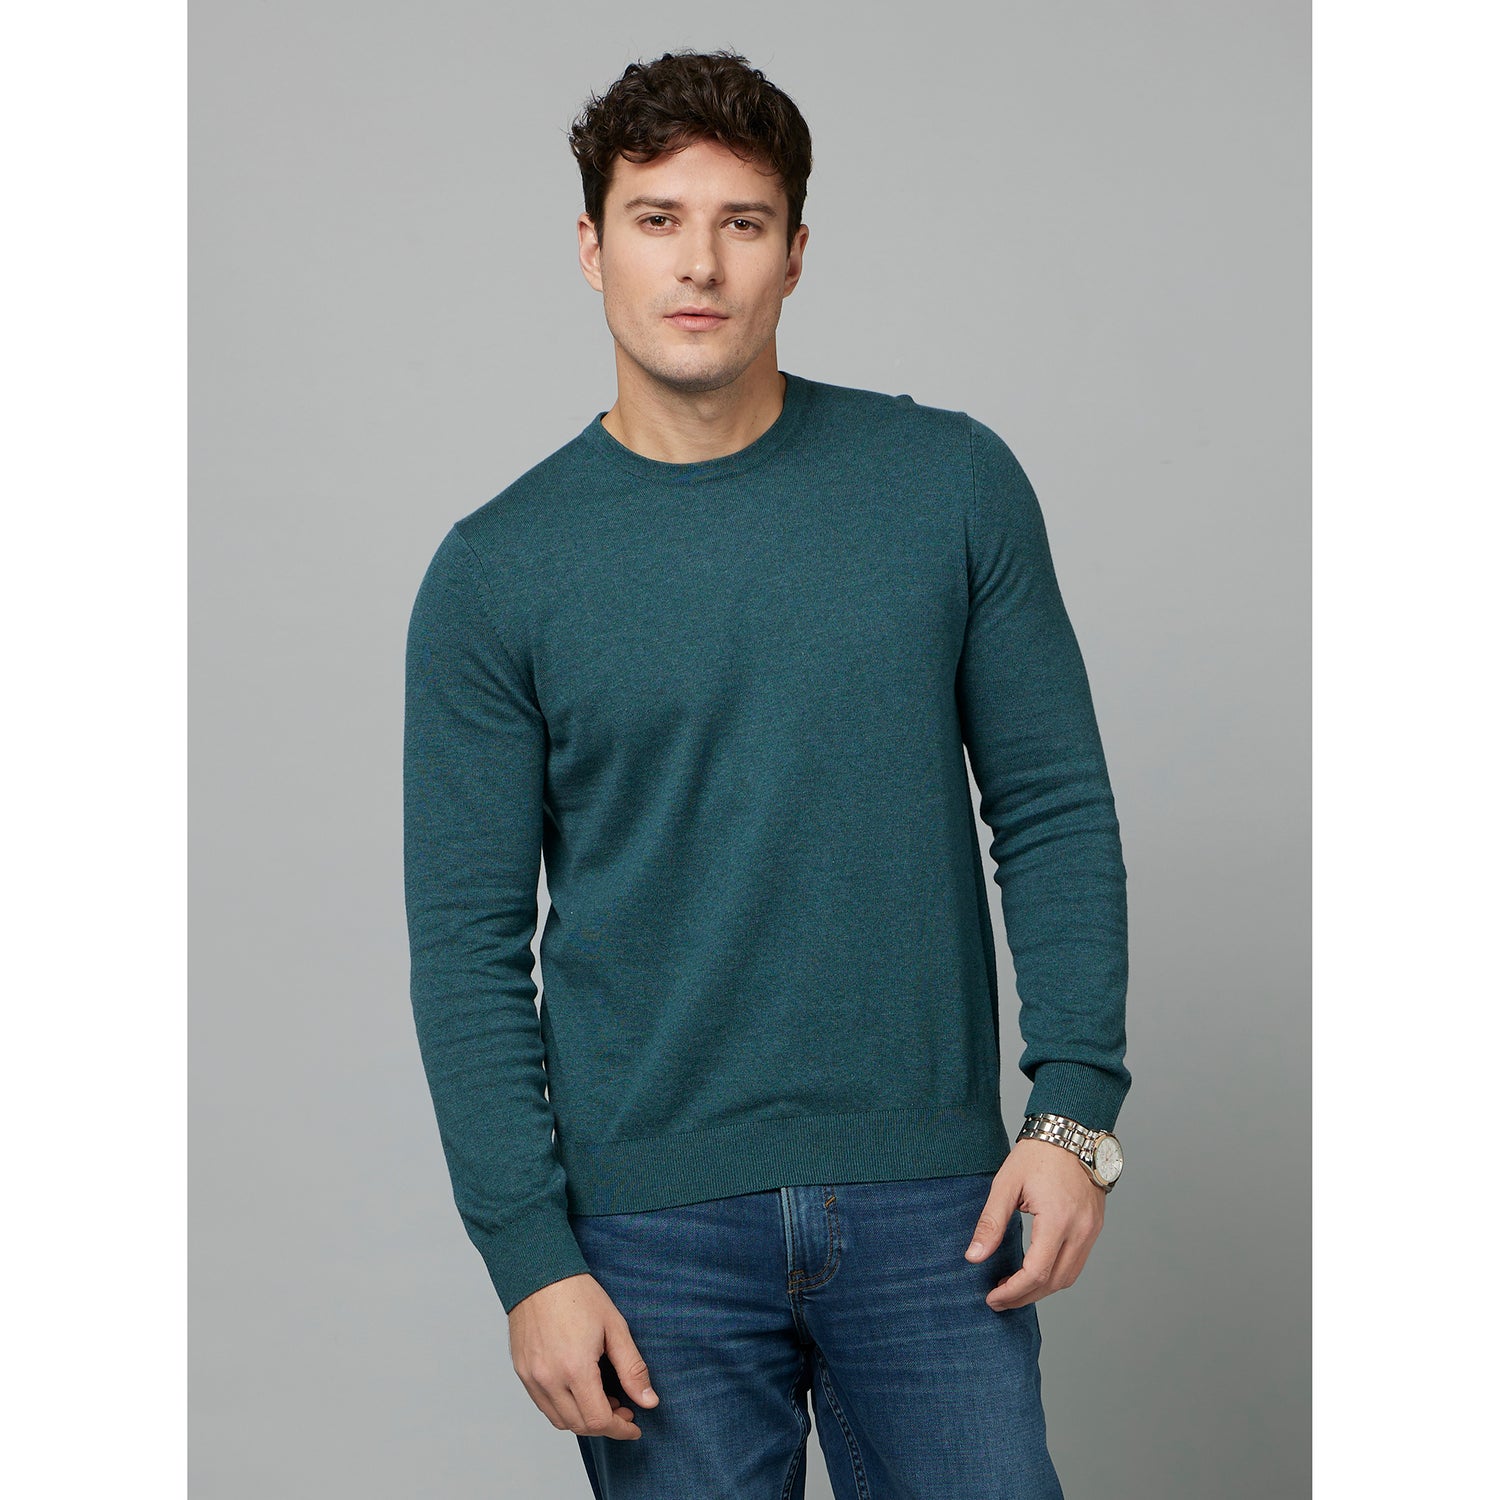 Green Solid Long Sleeve Cotton Pullover Sweater (DECOTONIN)